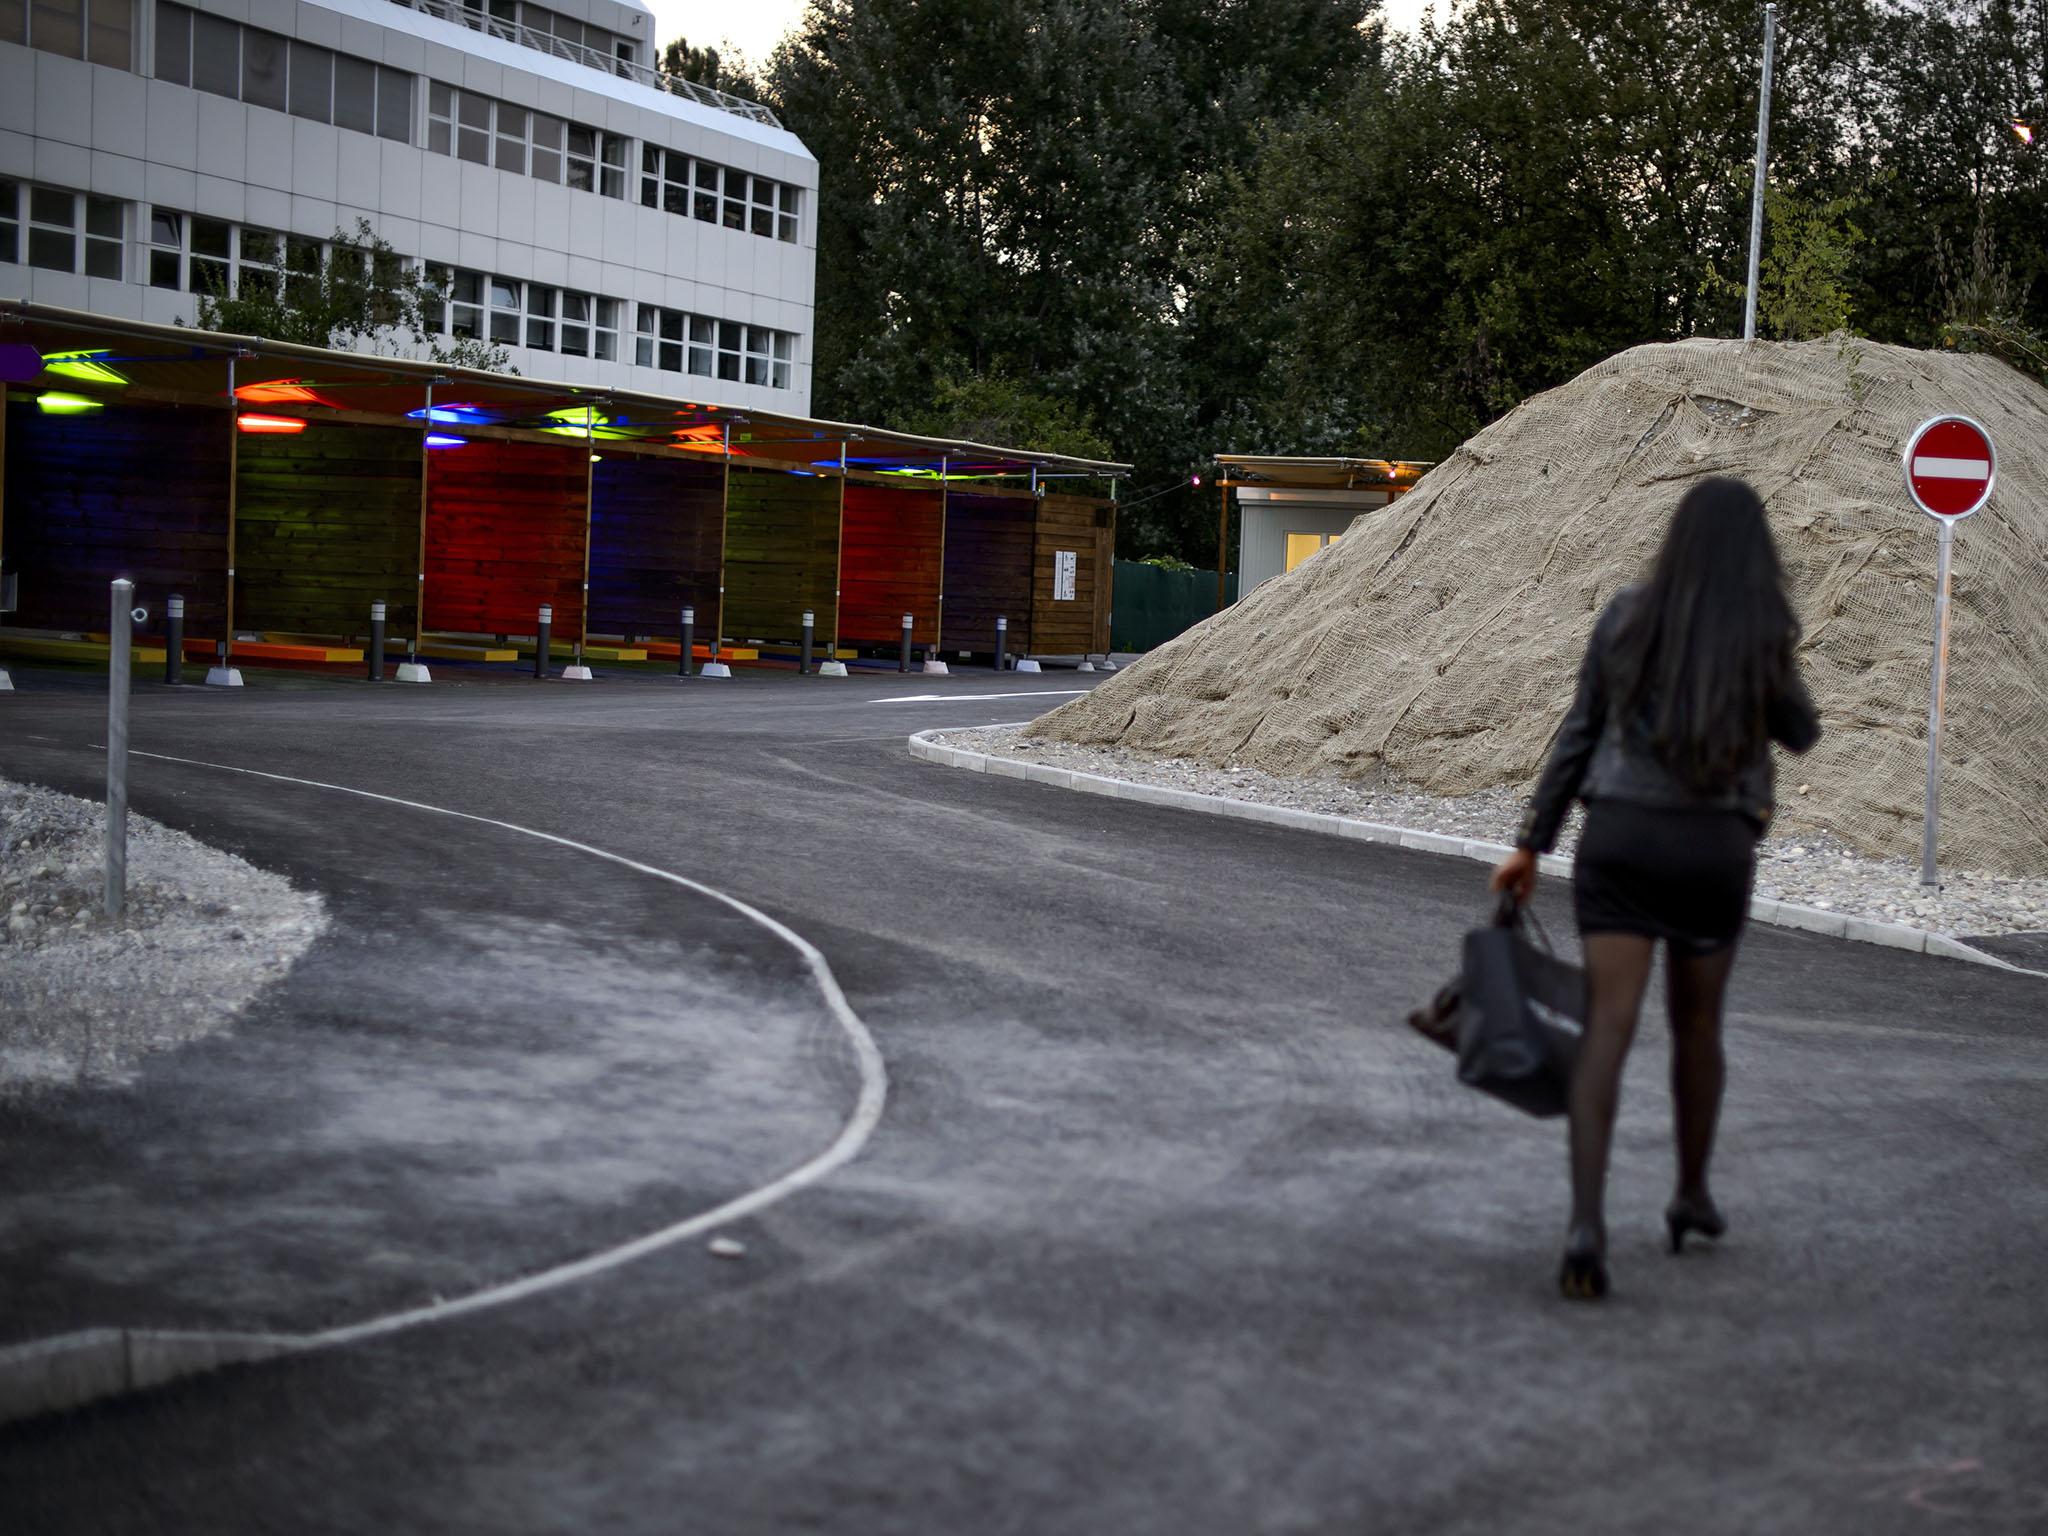 A prostitute walks past so-called ‘sex boxes’ at the opening day of Switzerland's first sex drive-in on 26 August 2013 in Zurich